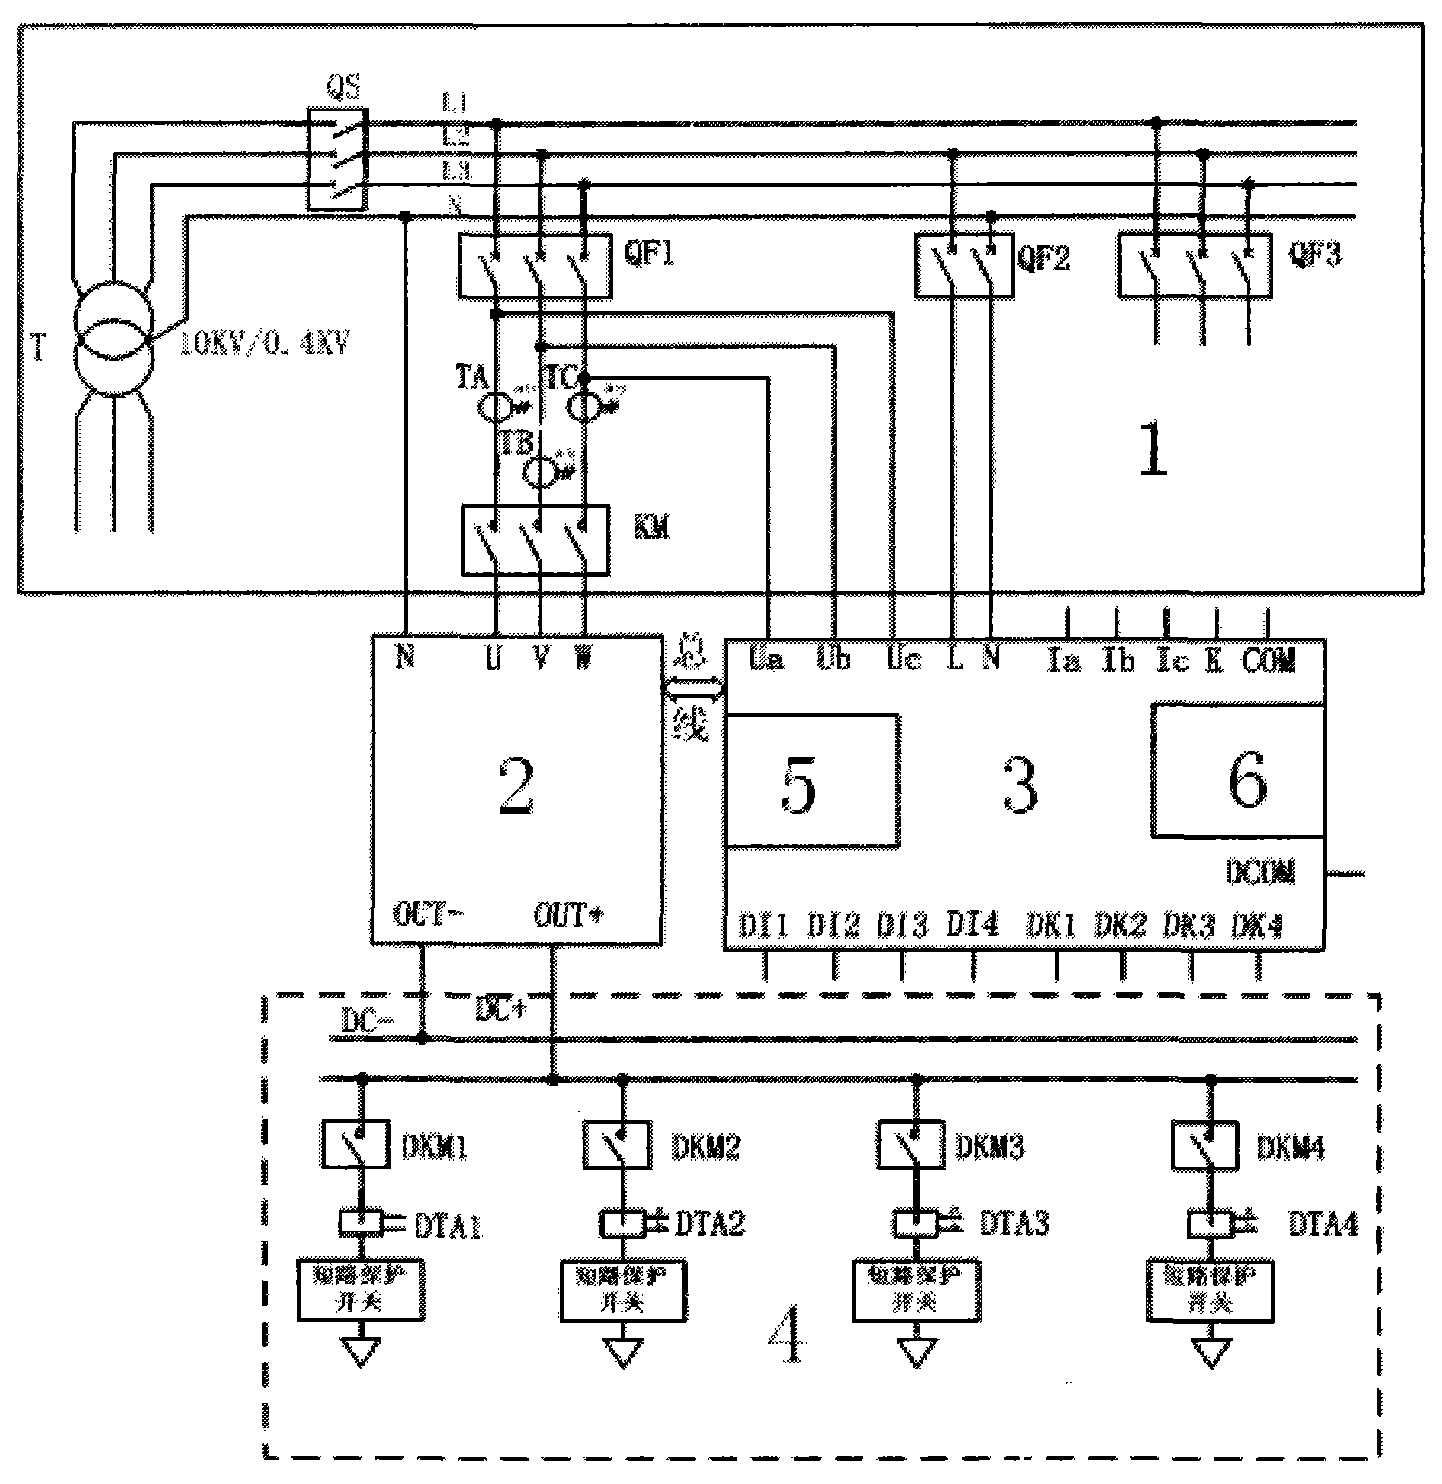 Direct-current centralized power supply dimming system and method for public lighting